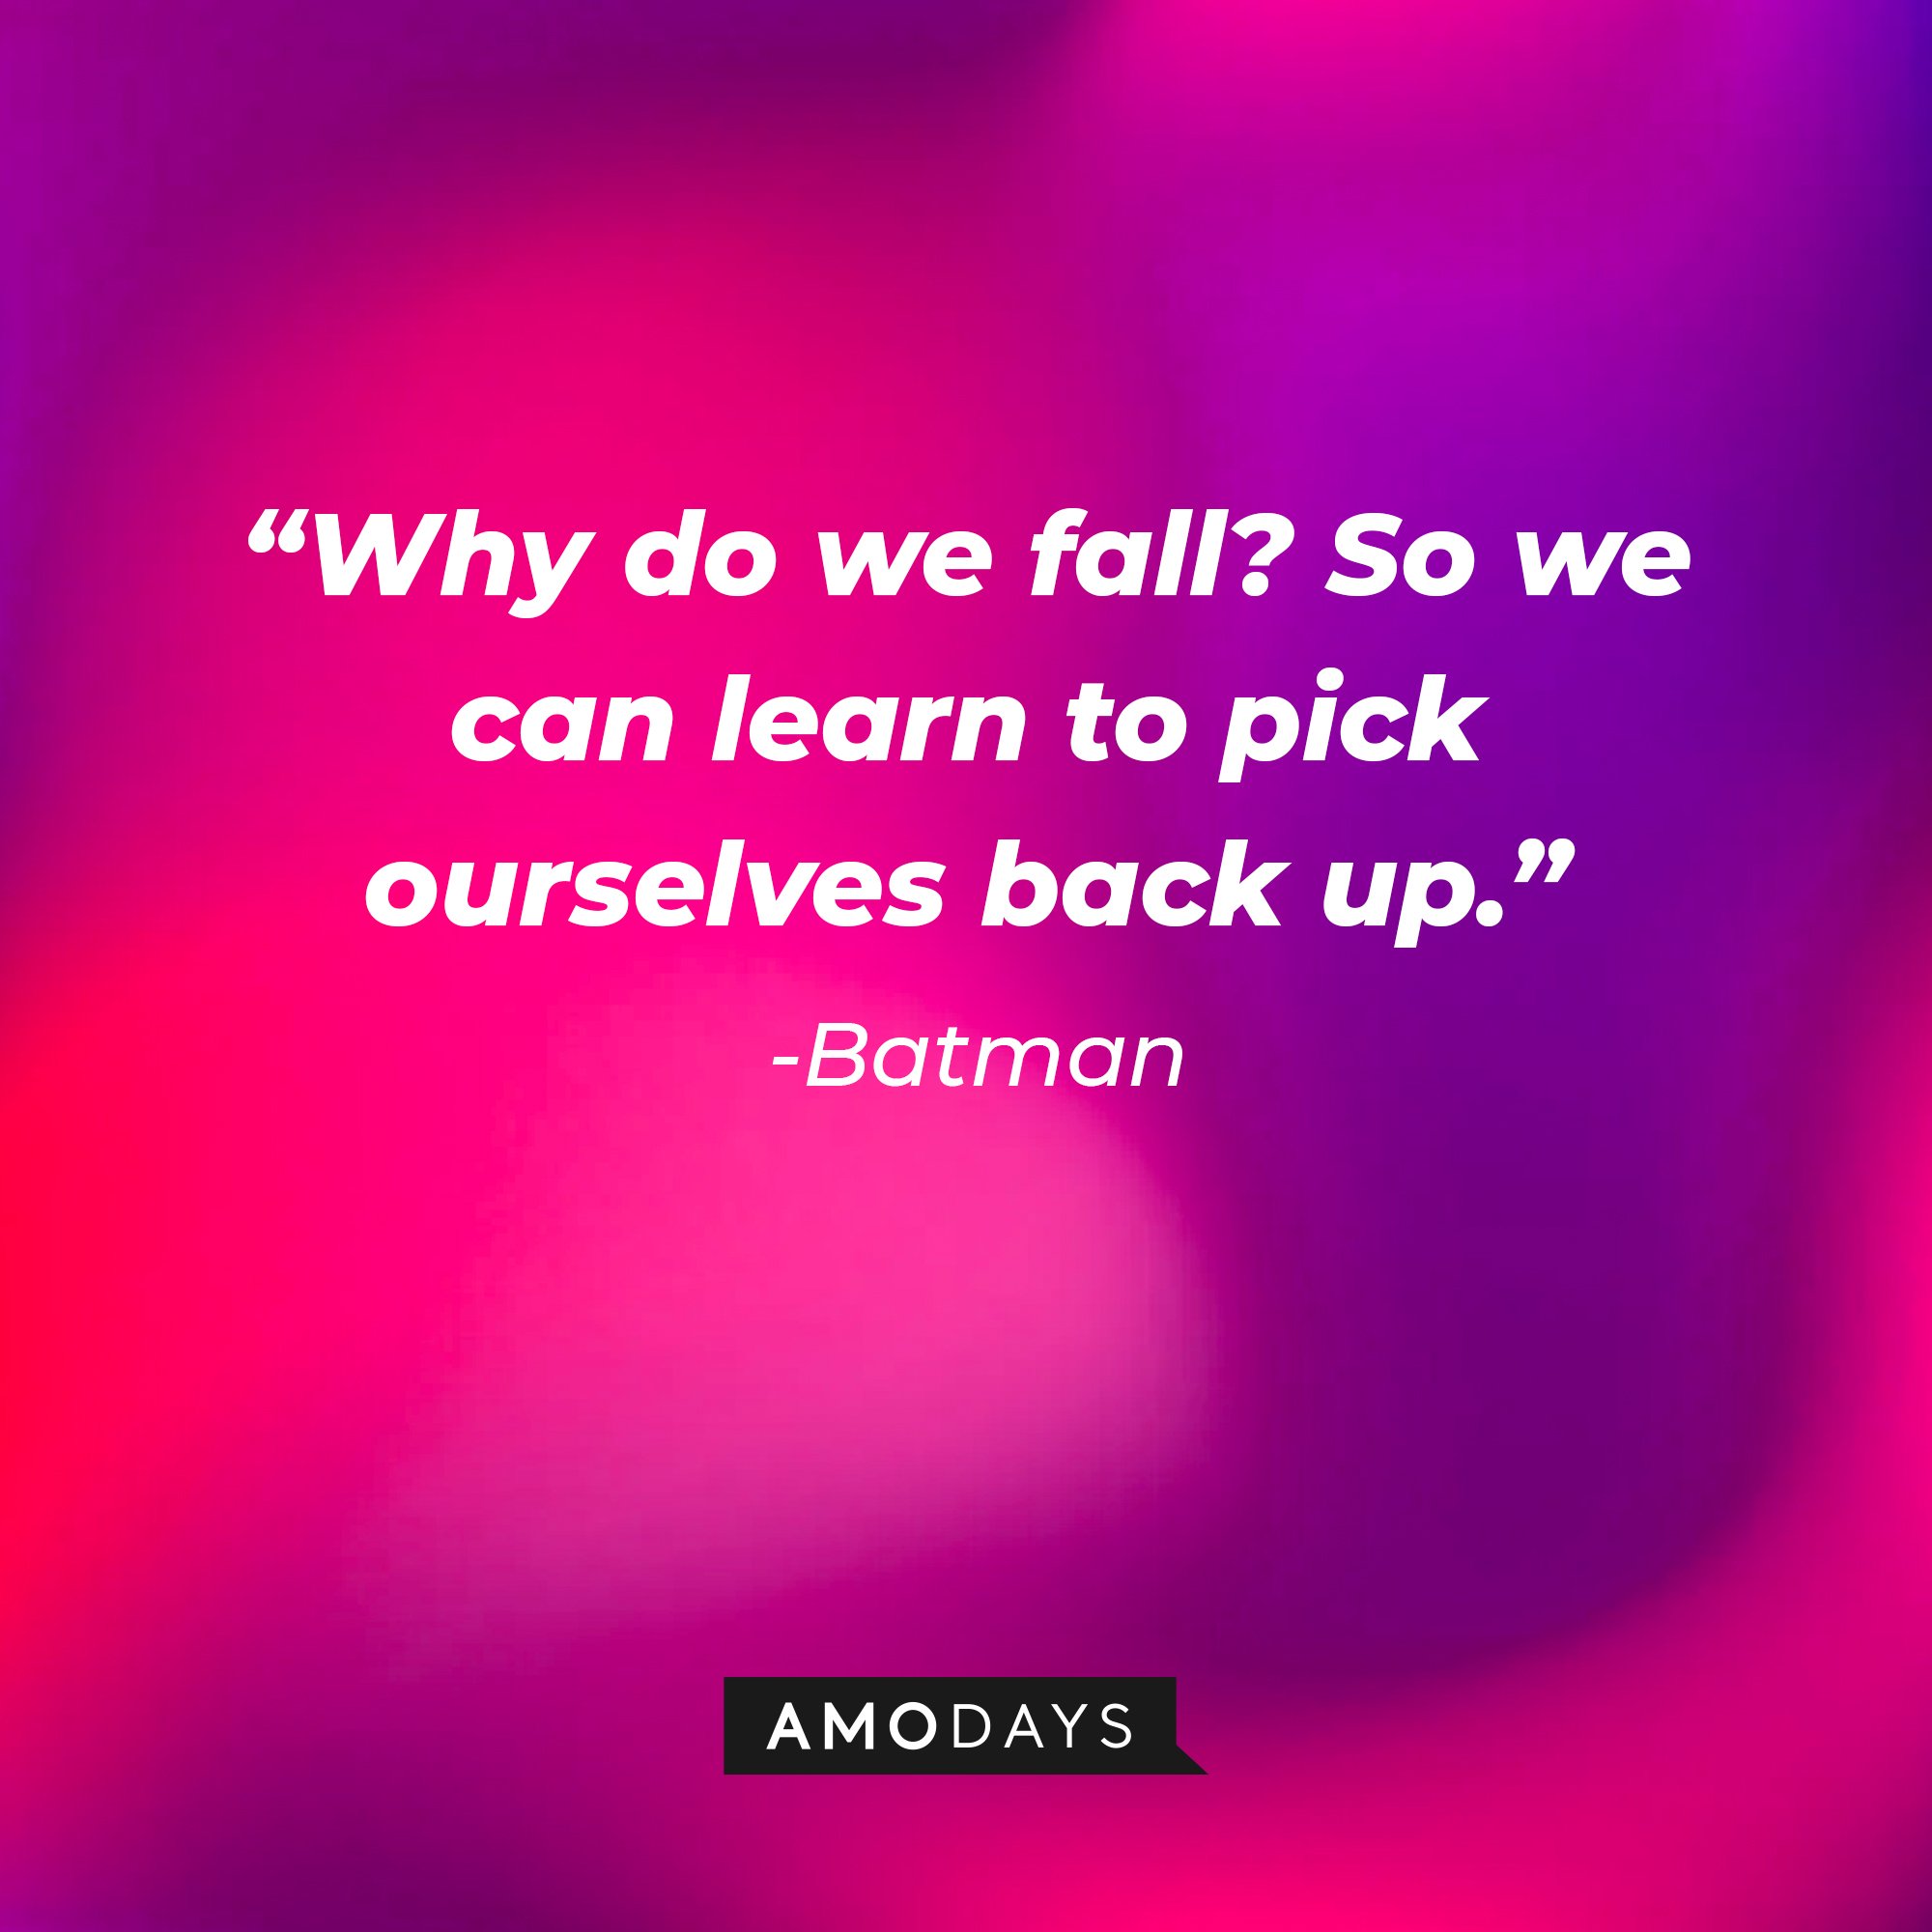 Batman's quote: “Why do we fall? So we can learn to pick ourselves back up.” | Image: AmoDays